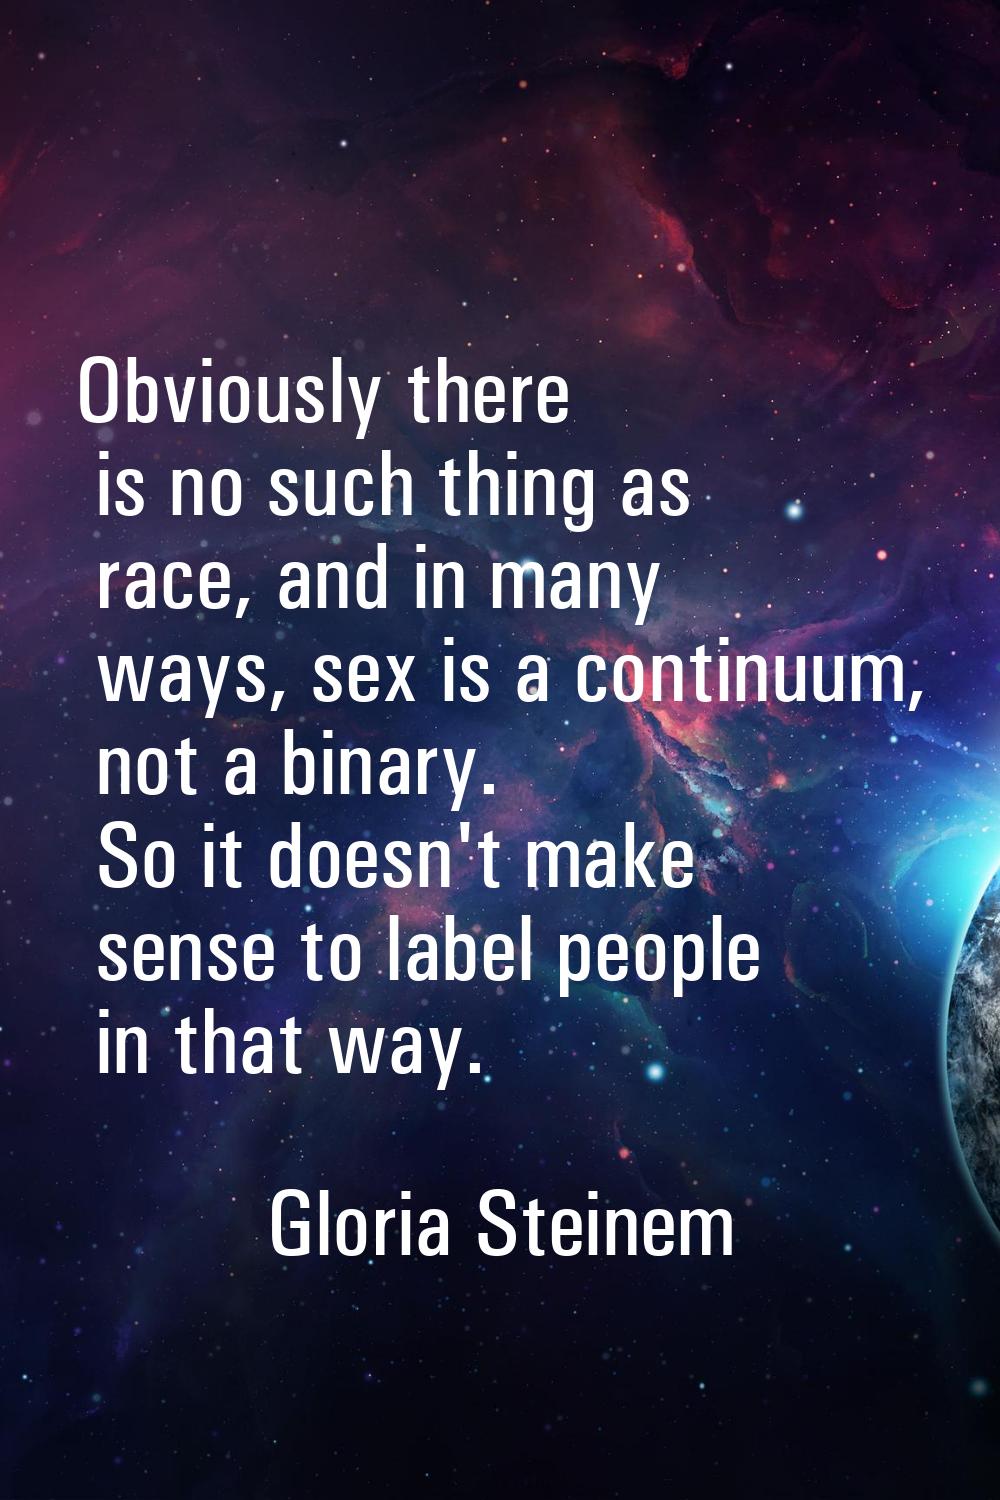 Obviously there is no such thing as race, and in many ways, sex is a continuum, not a binary. So it